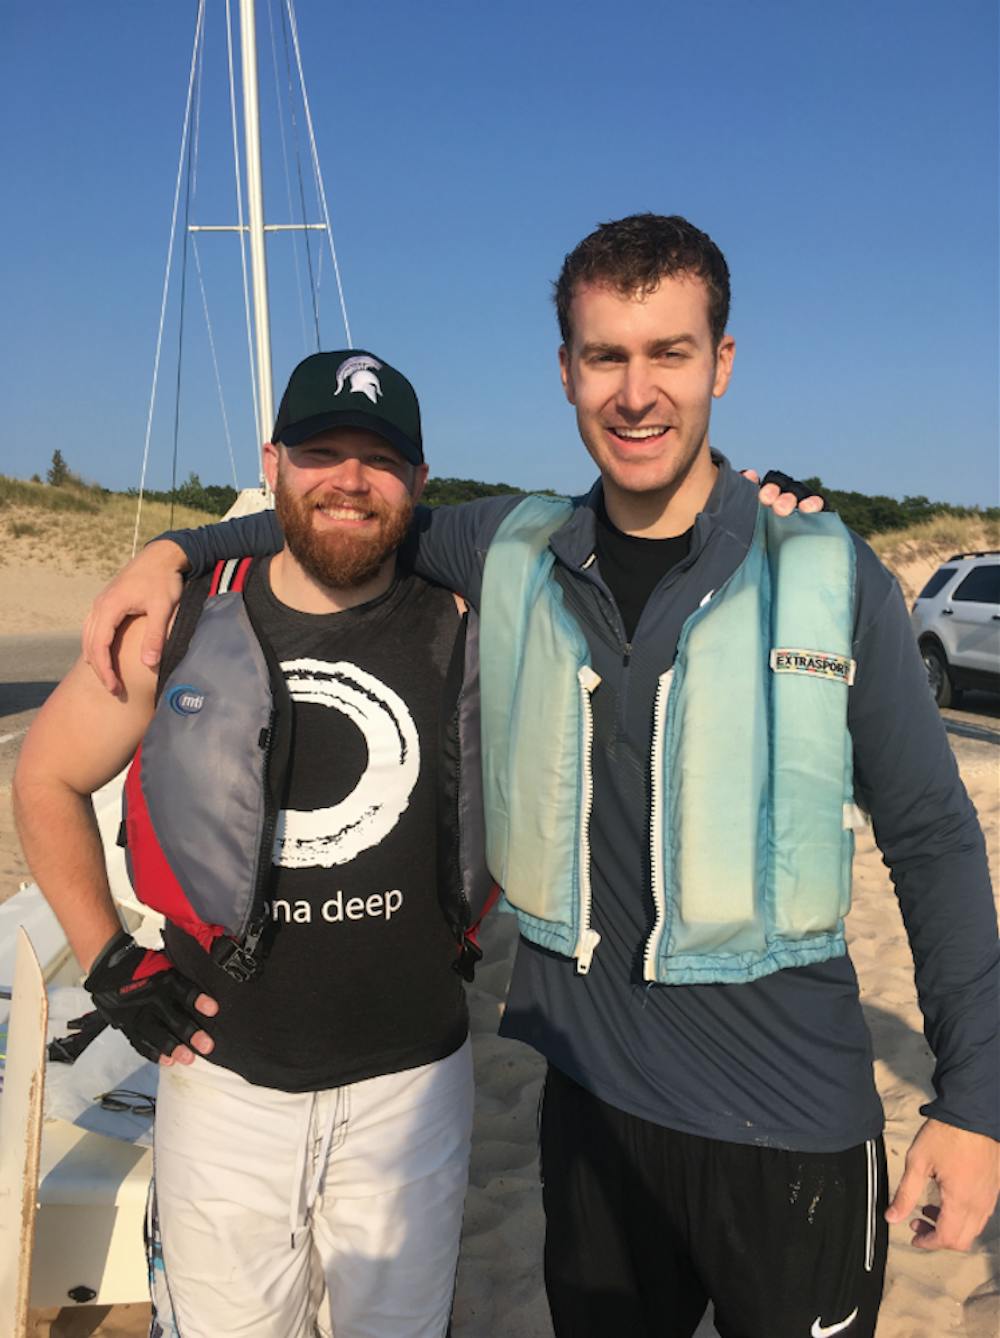 <p>J.T. Bohland (left) and Drew Fries (right) after they finished sailing 65-miles across Lake Michigan. Photo courtesy of Drew Fries&nbsp;</p>